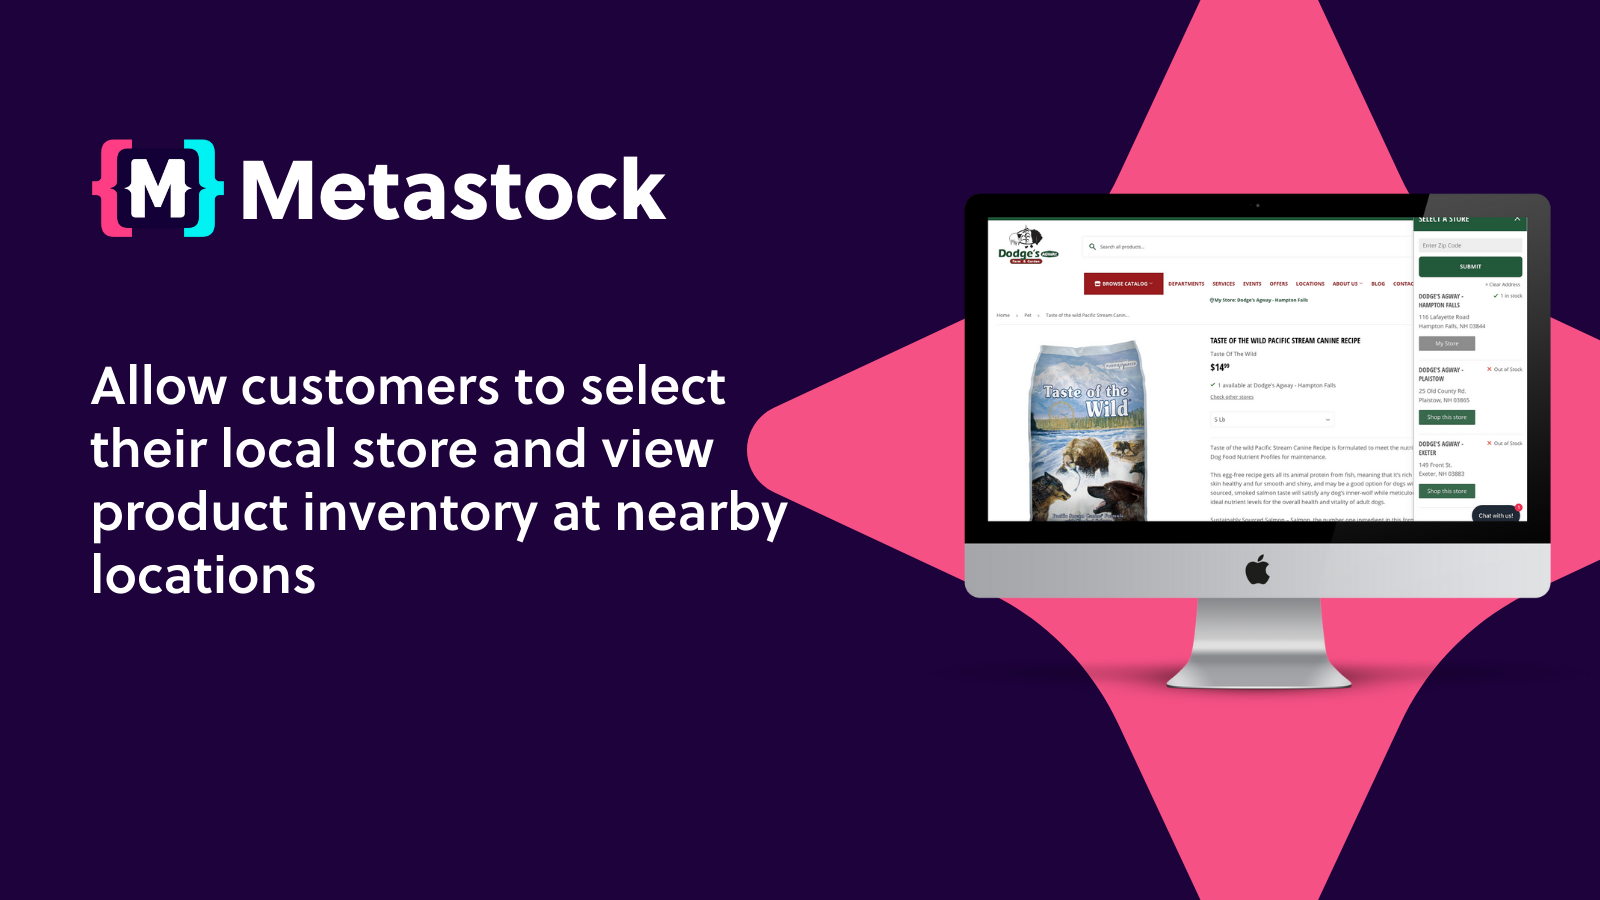 Allow customers to select local store and view product inventory